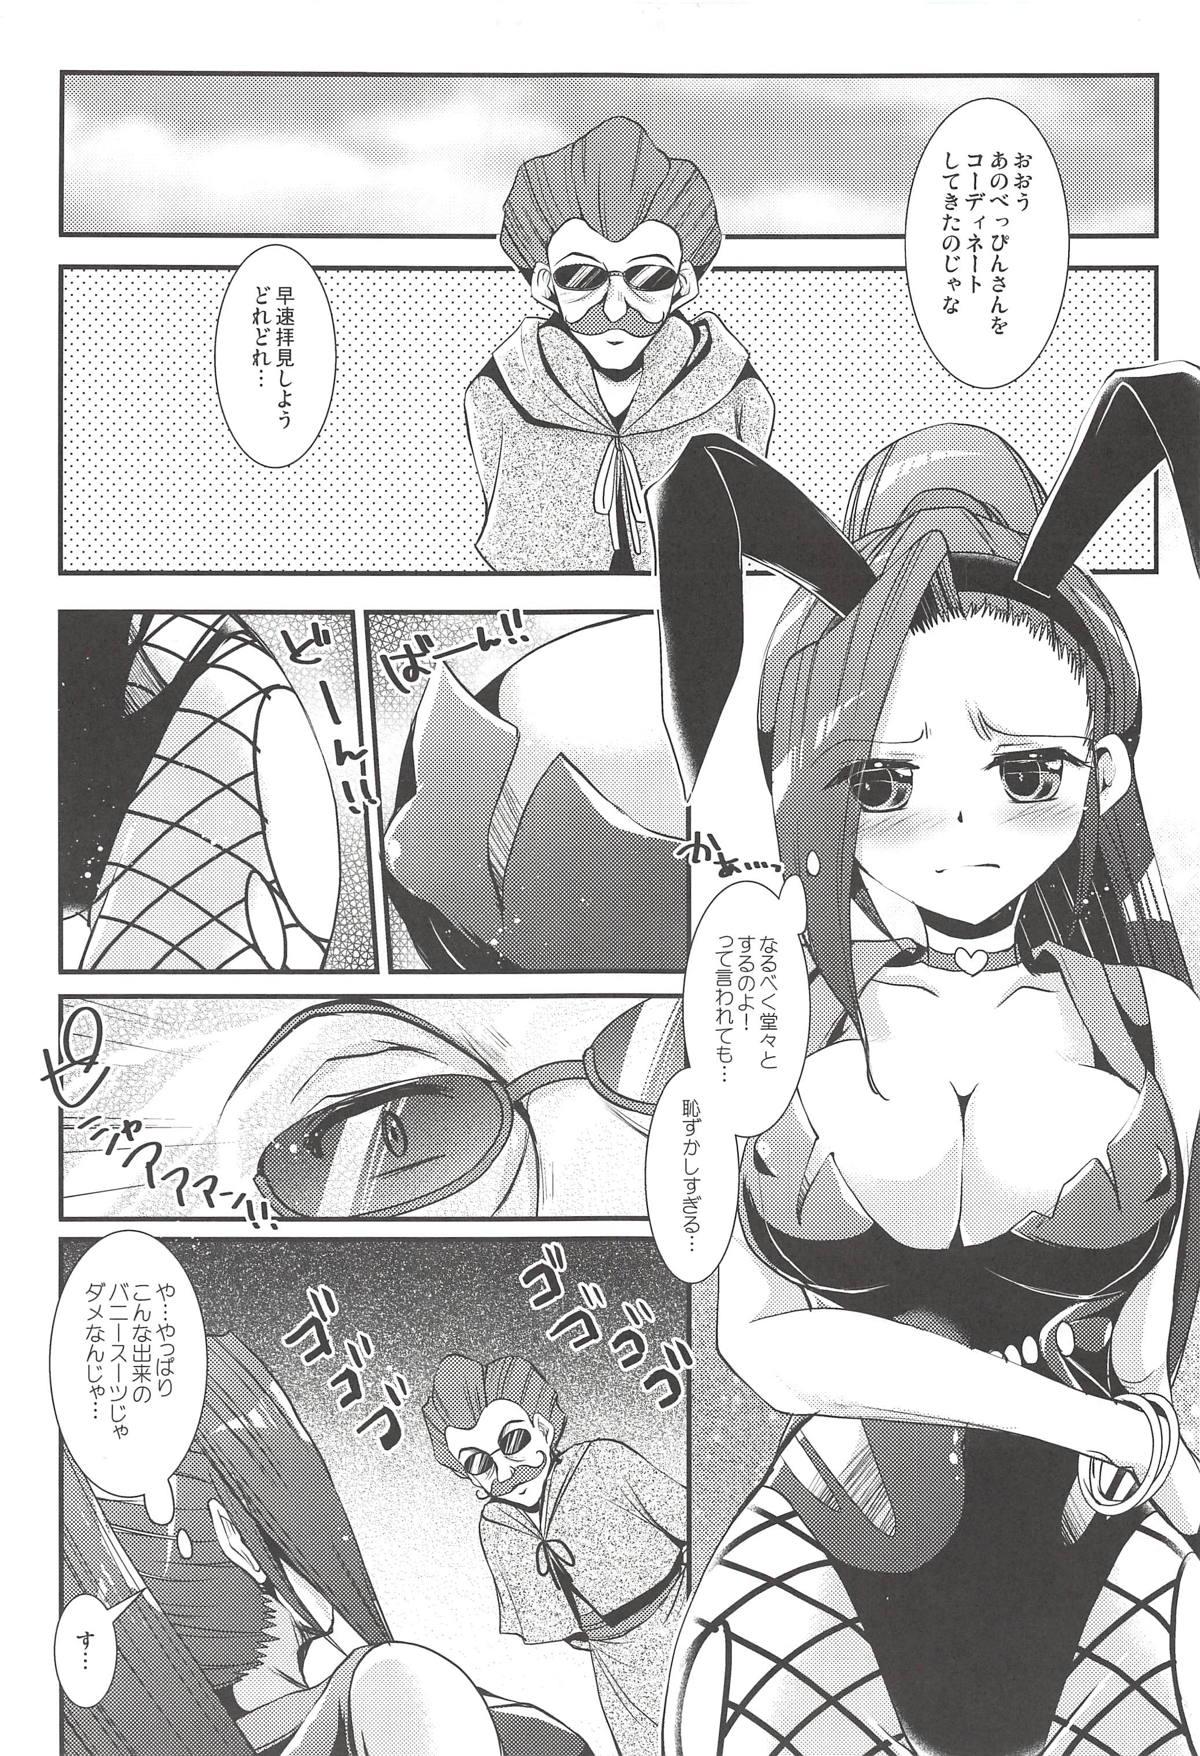 Toilet Shippai Bunny - Failure of Bunny Suit - Dragon quest xi Bigtits - Page 8